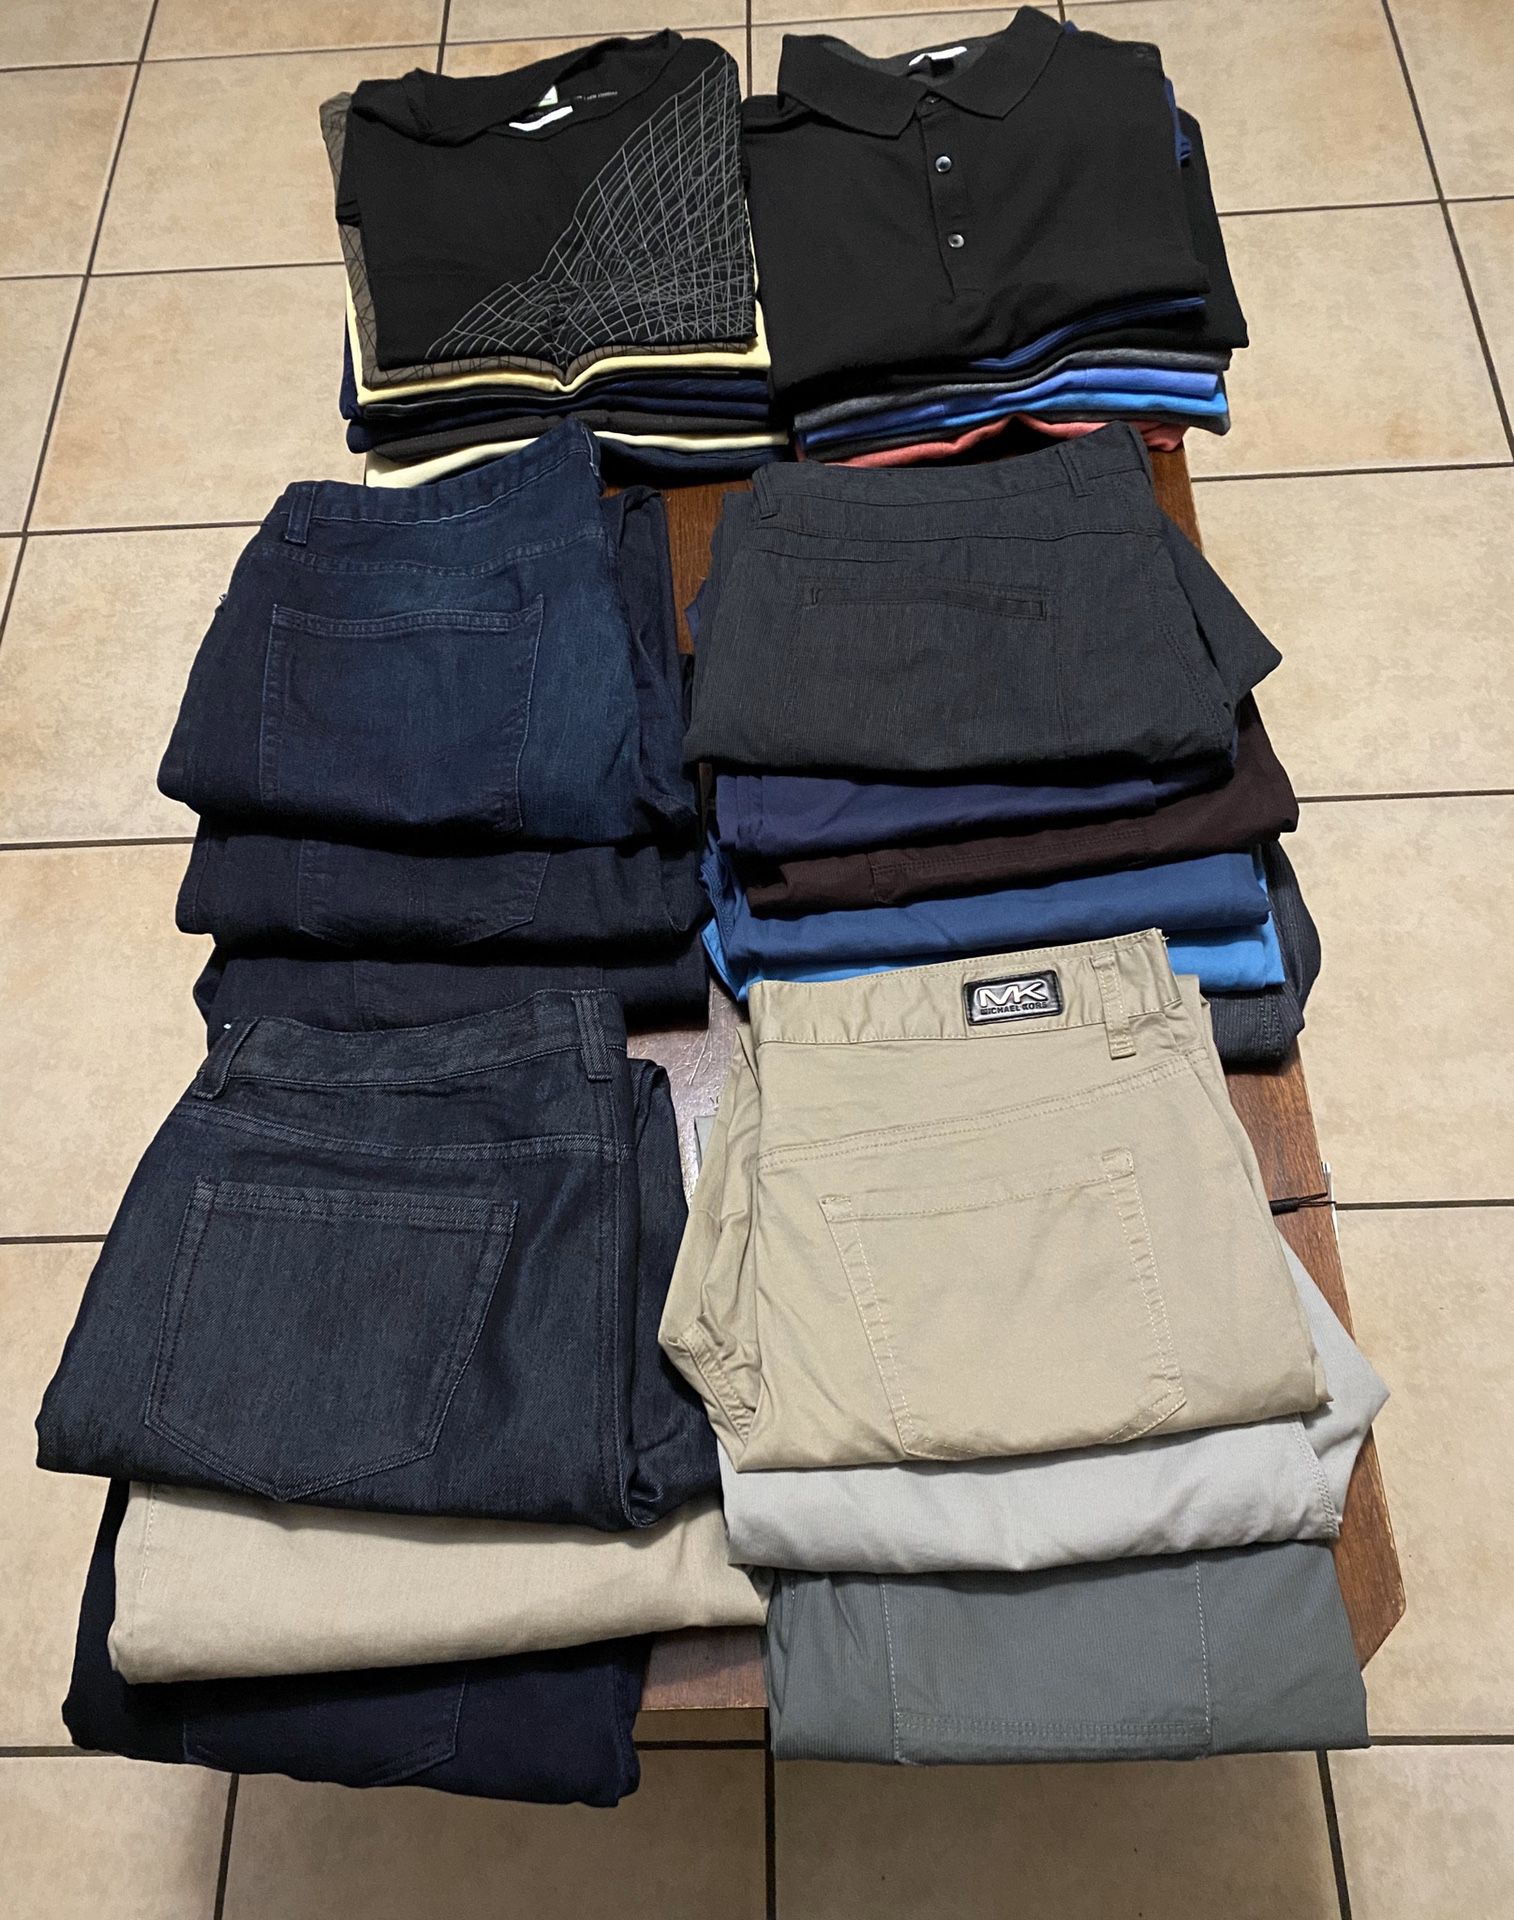 32 pieces calvin klein jeans and polos michael kors jeans and polos and calvin klein t shirts all jeans size 36x30 an 36x32 all polo shirts and t shi